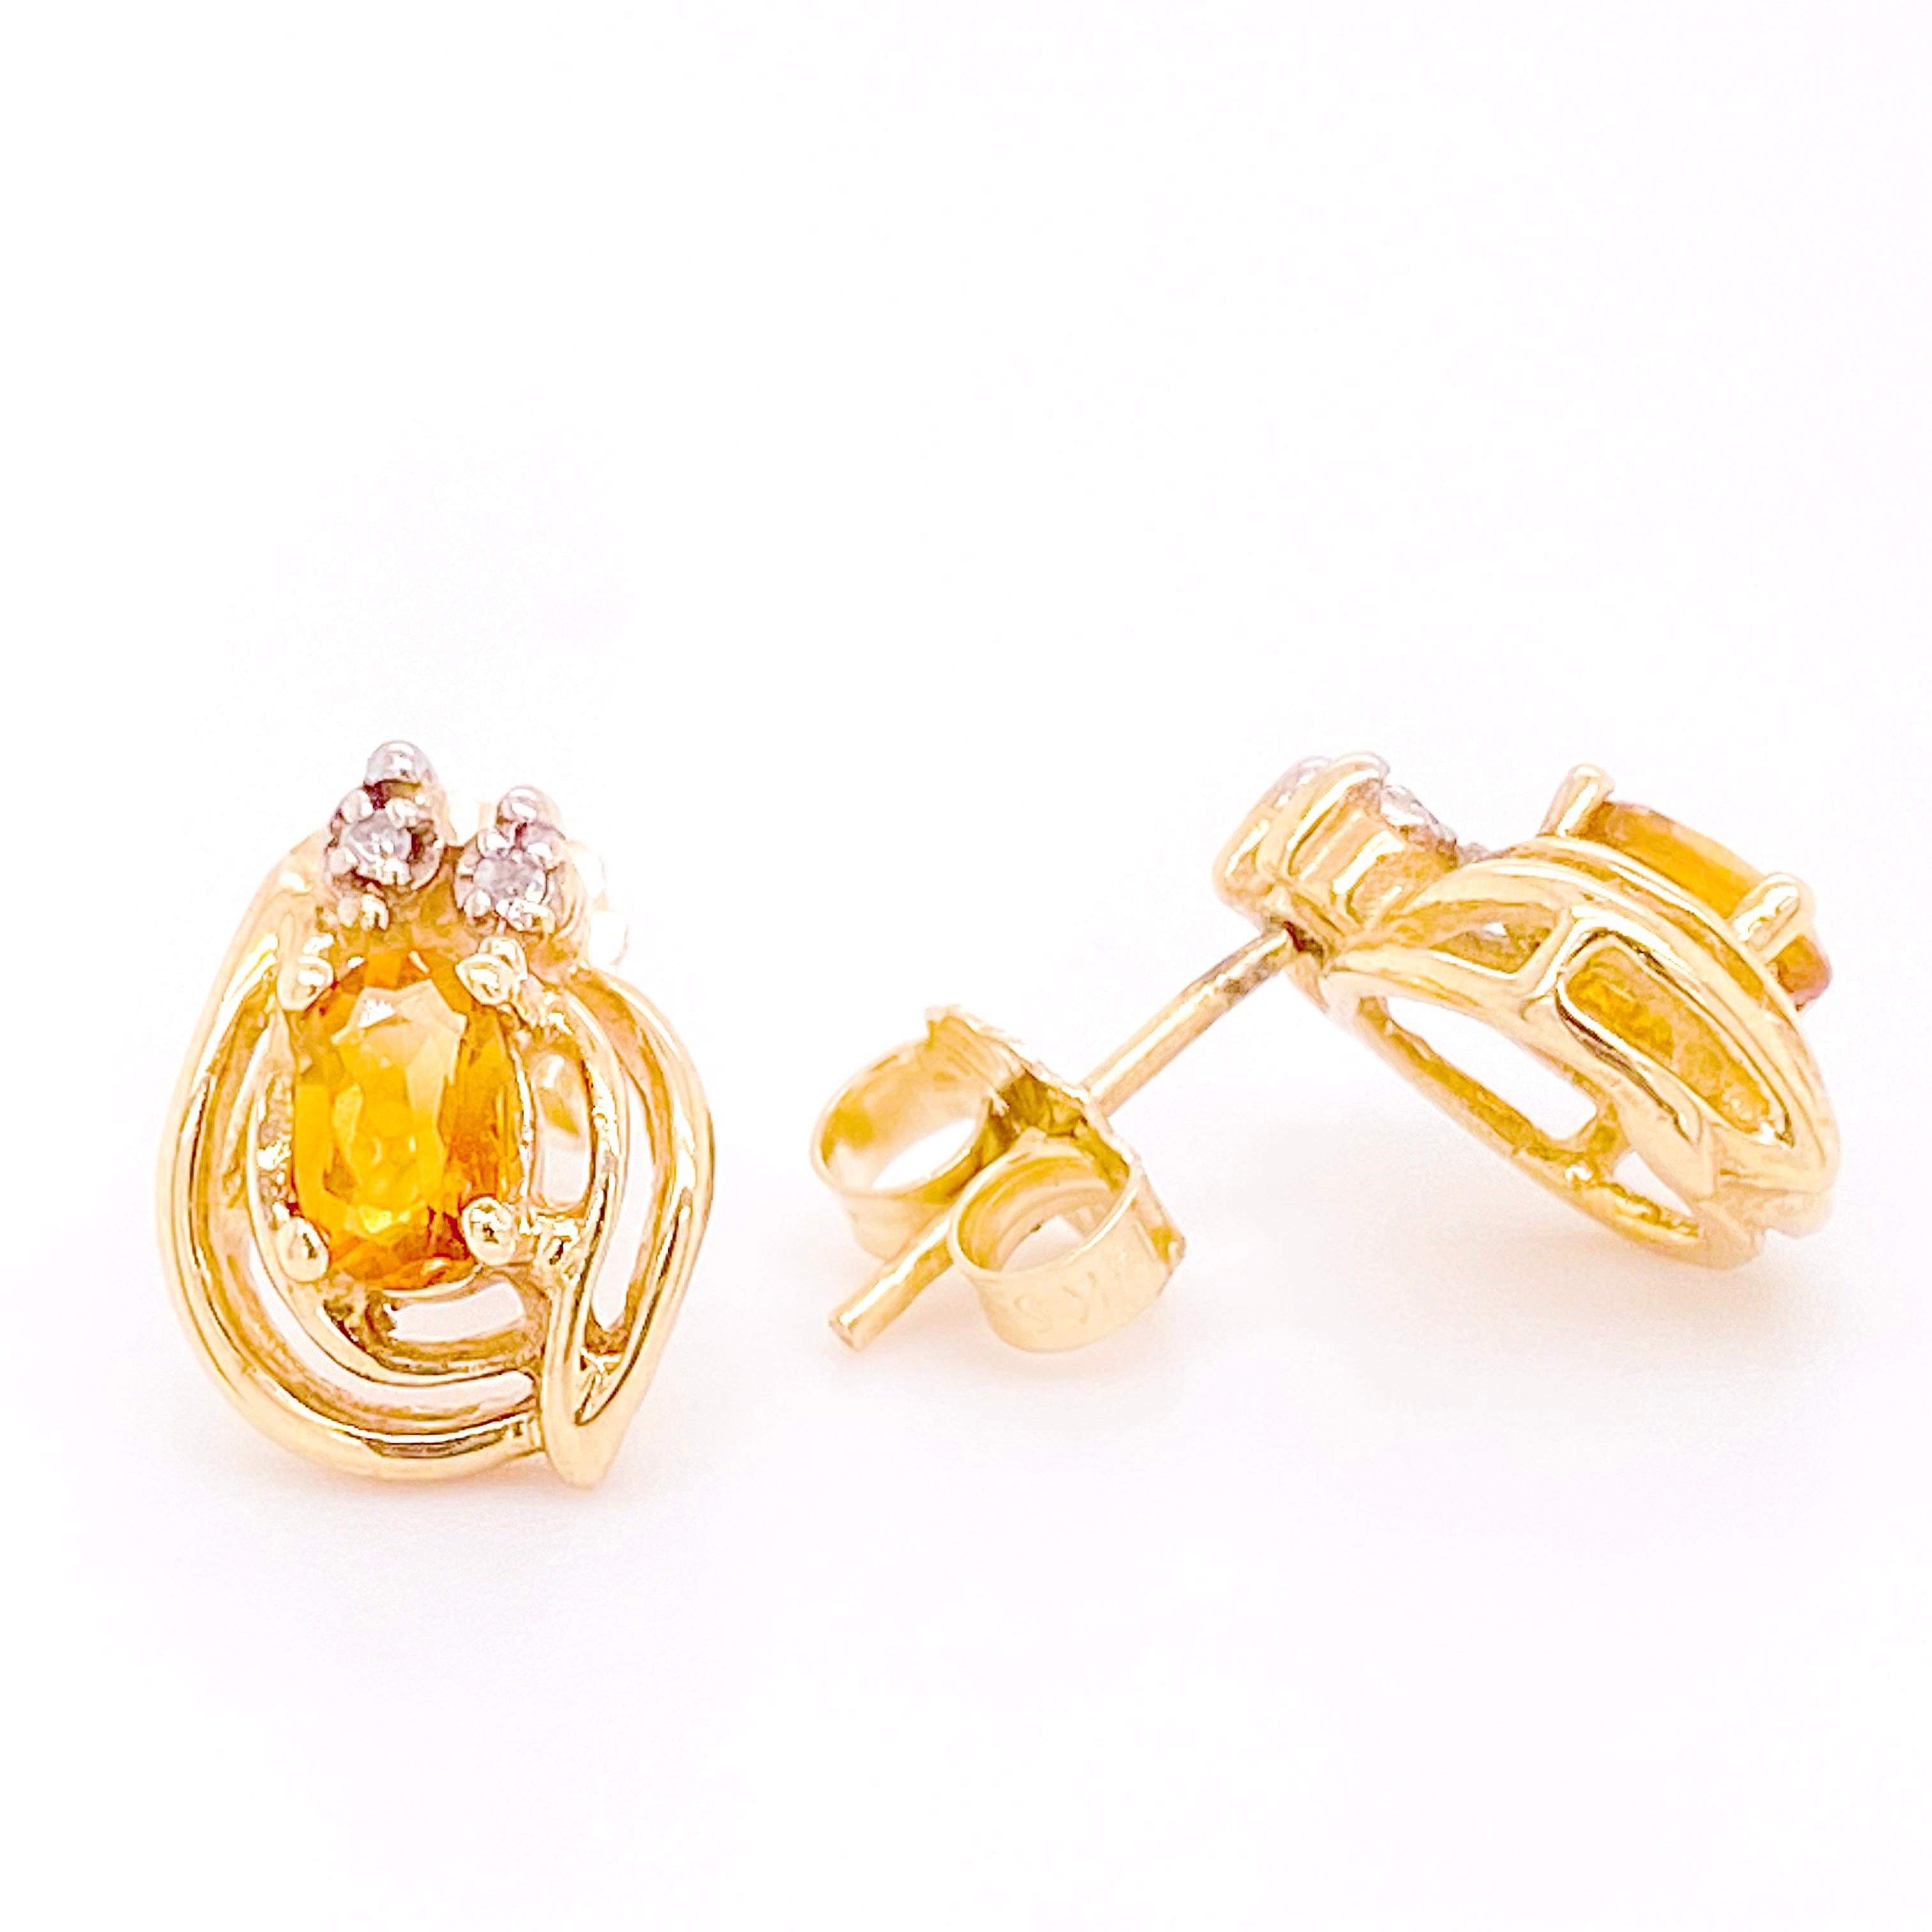 These citrine and diamond earrings are a nice minimalist look. Constructed out of solid 14 karat yellow gold with an oval genuine citrine and an accent diamond in each. There is gold swirl that goes around each gemstone.
The details for these